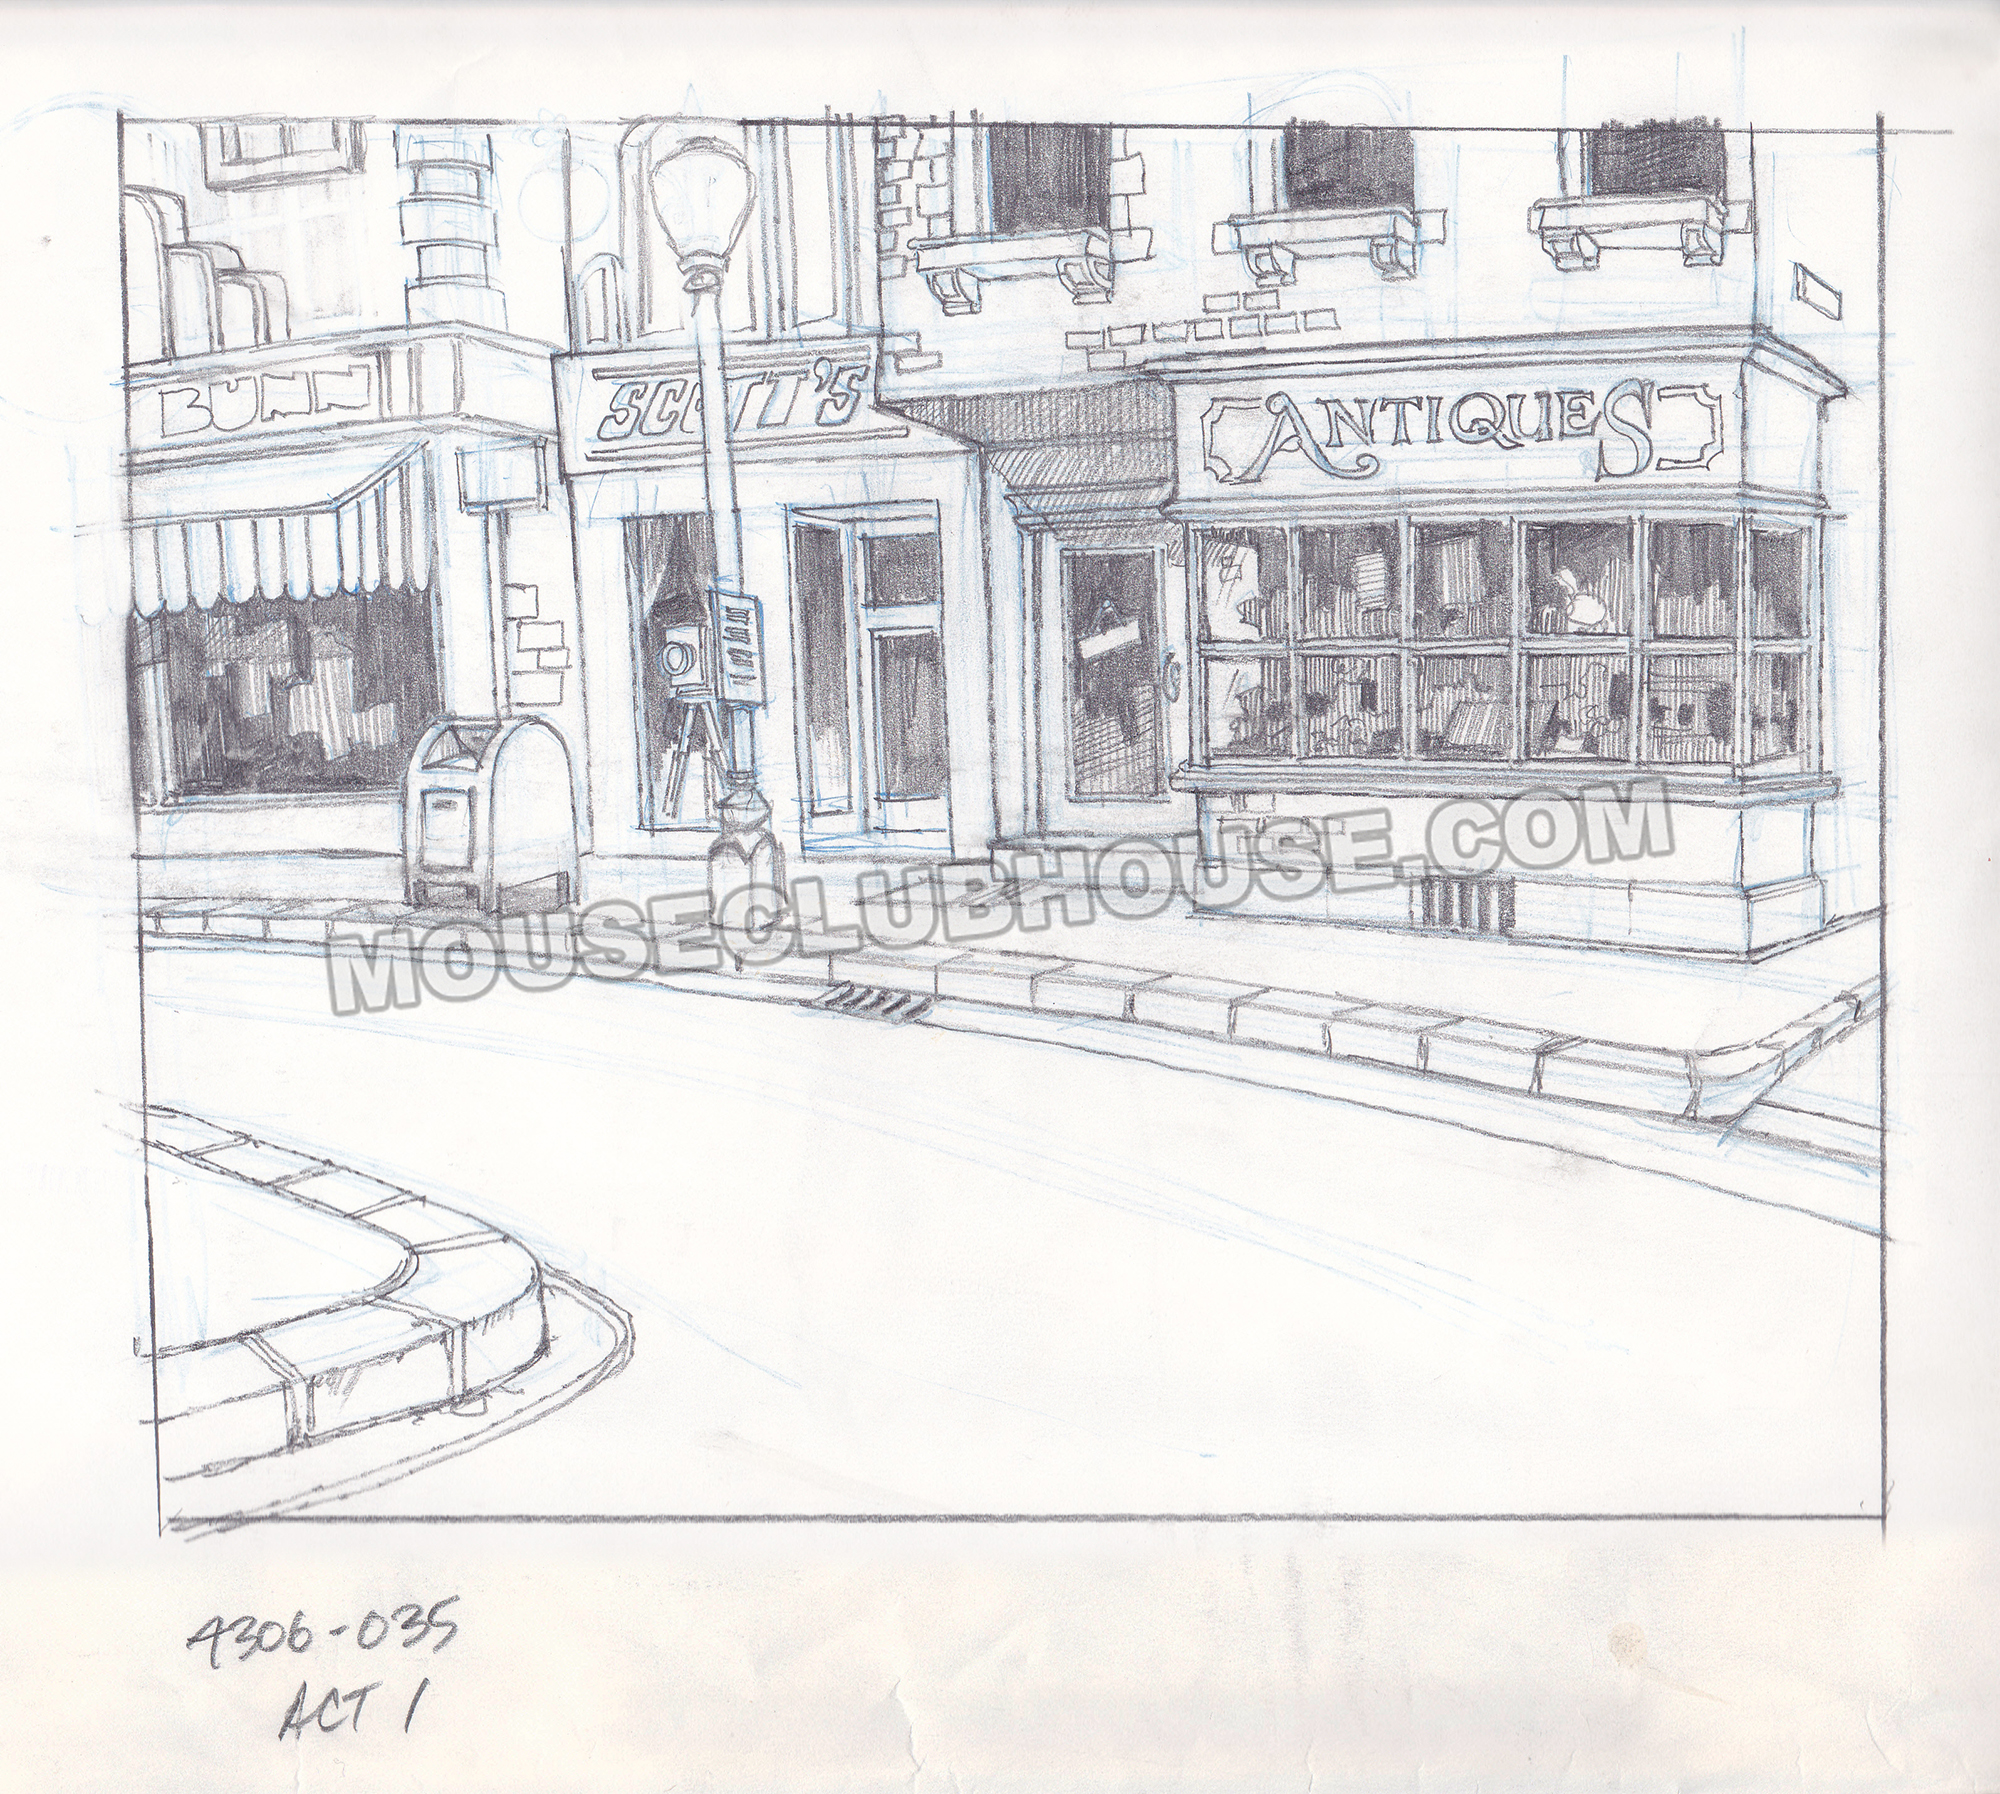 TaleSpin artist Derek Carter gave me my own camera shop in this TaleSpin layout key